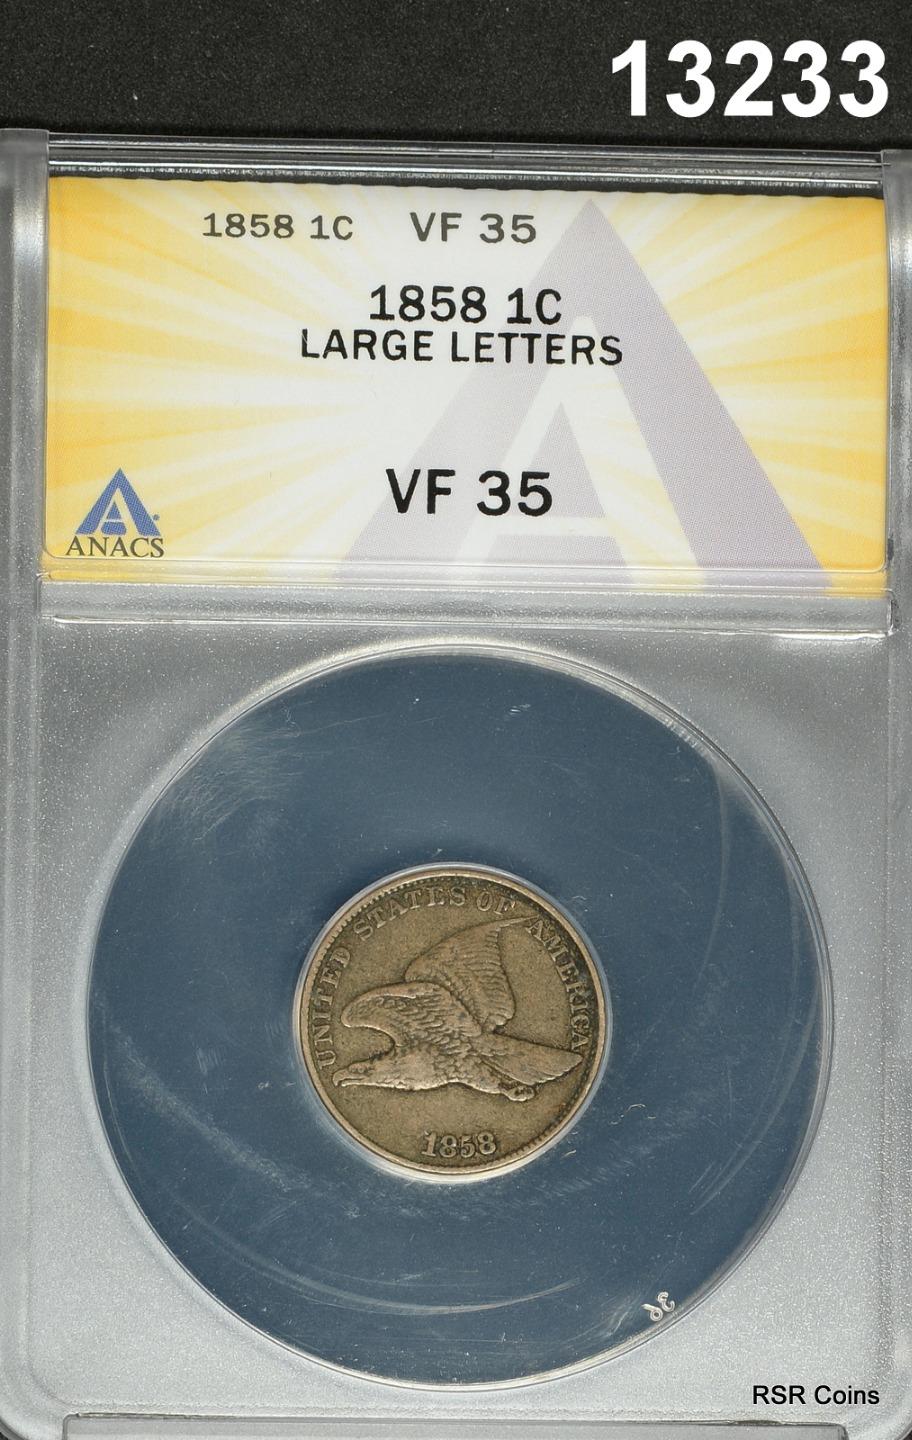 1858 FLYING EAGLE CENT LARGE LETTERS ANACS CERTIFED VF35 ORIGINAL! #13233